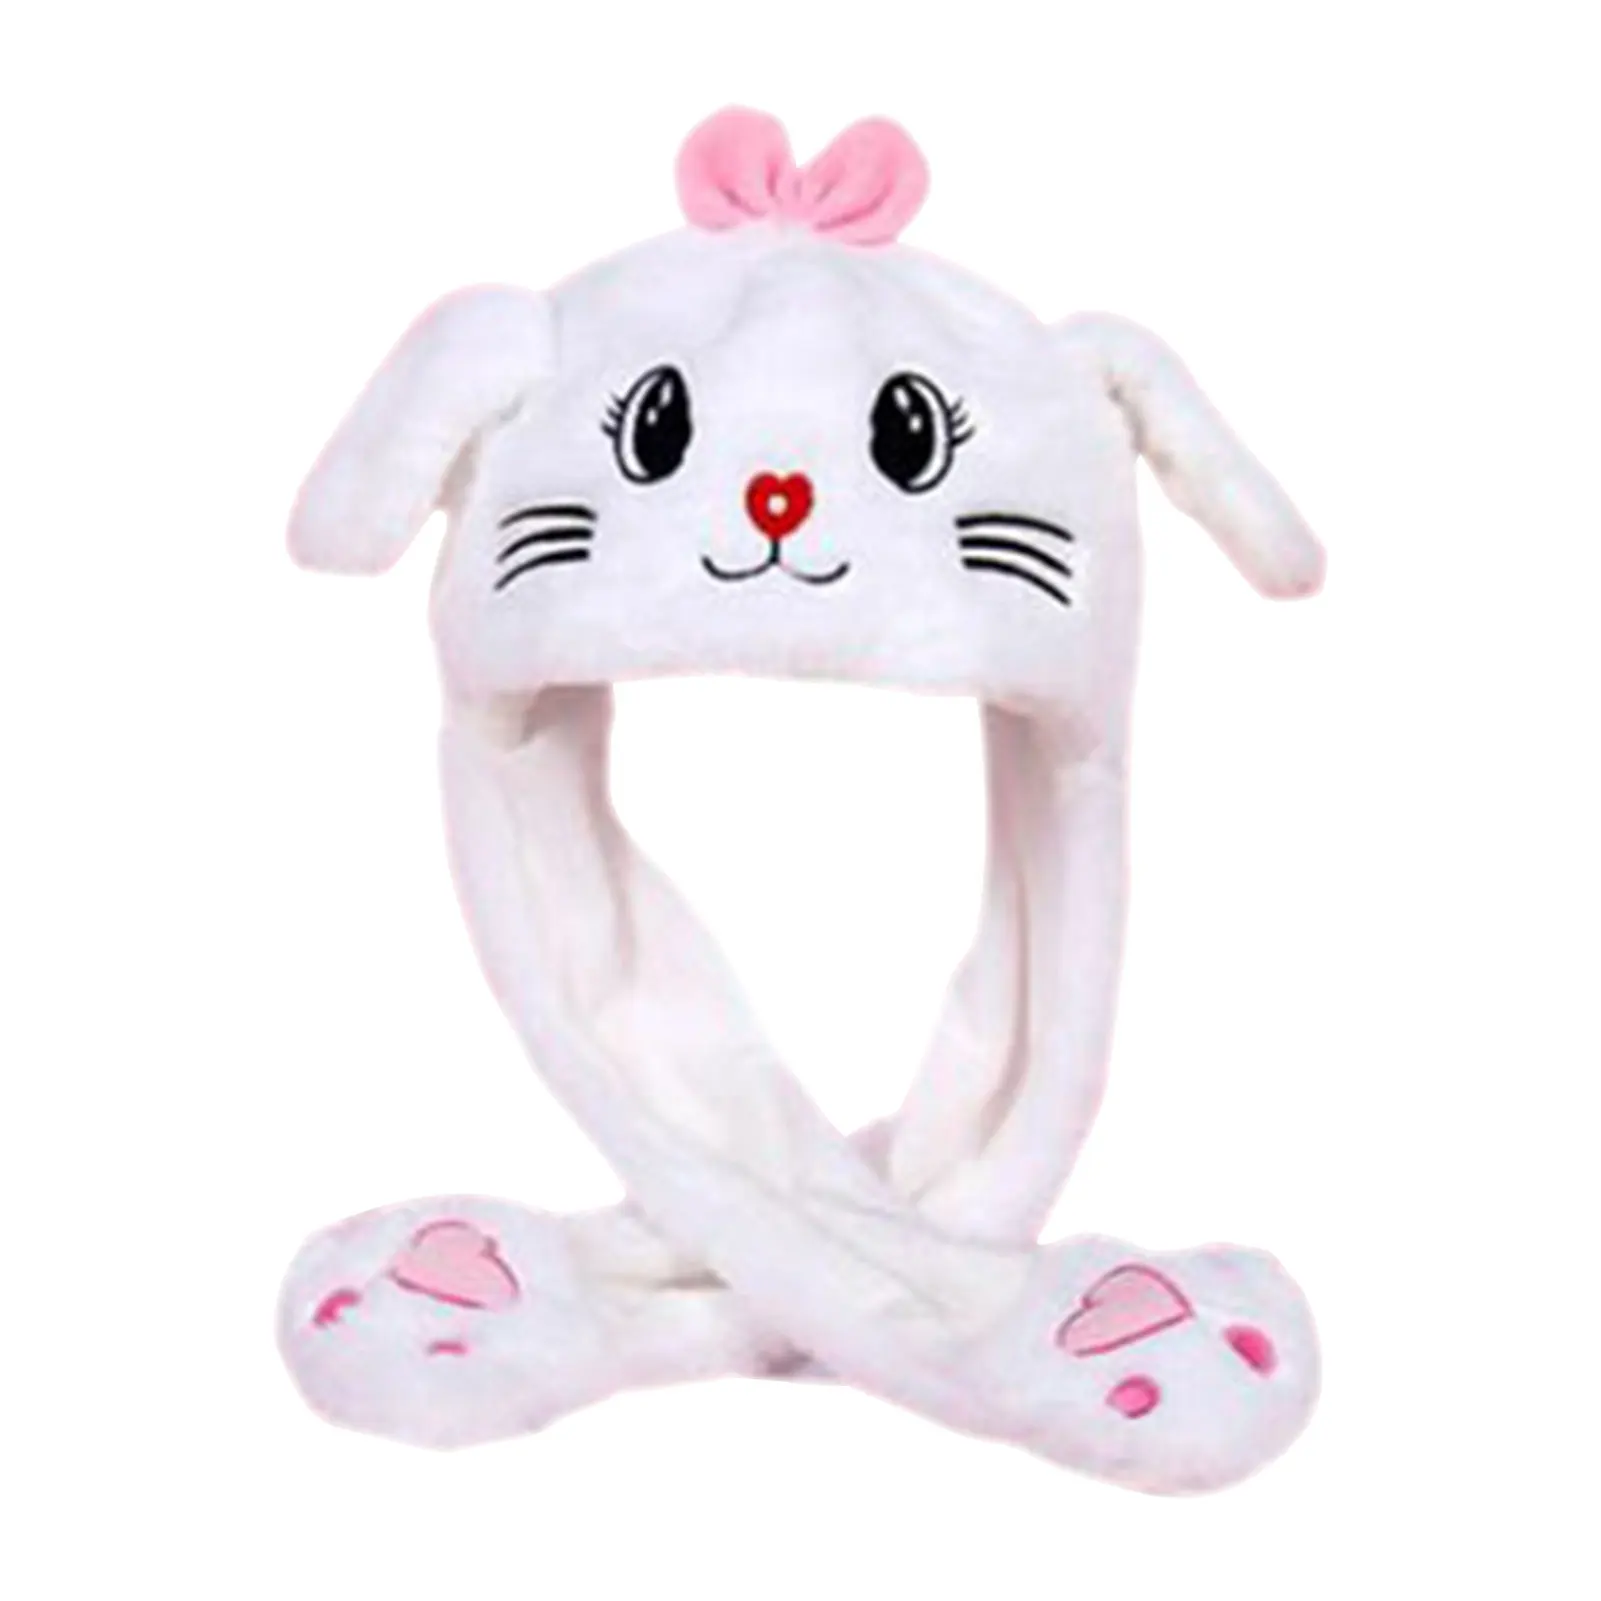 Lovely Moving Bunny Ears Hat Plush Rabbit Hat Funny Play Toy Up Down Moving Bunny Ears Toy Hat Girlfriend Children Girls Gifts cute bunny ears hat moving pikachu rabbit soft jumping up cap funny toy girls cartoon kawaii plush hat toys gift for adult kids